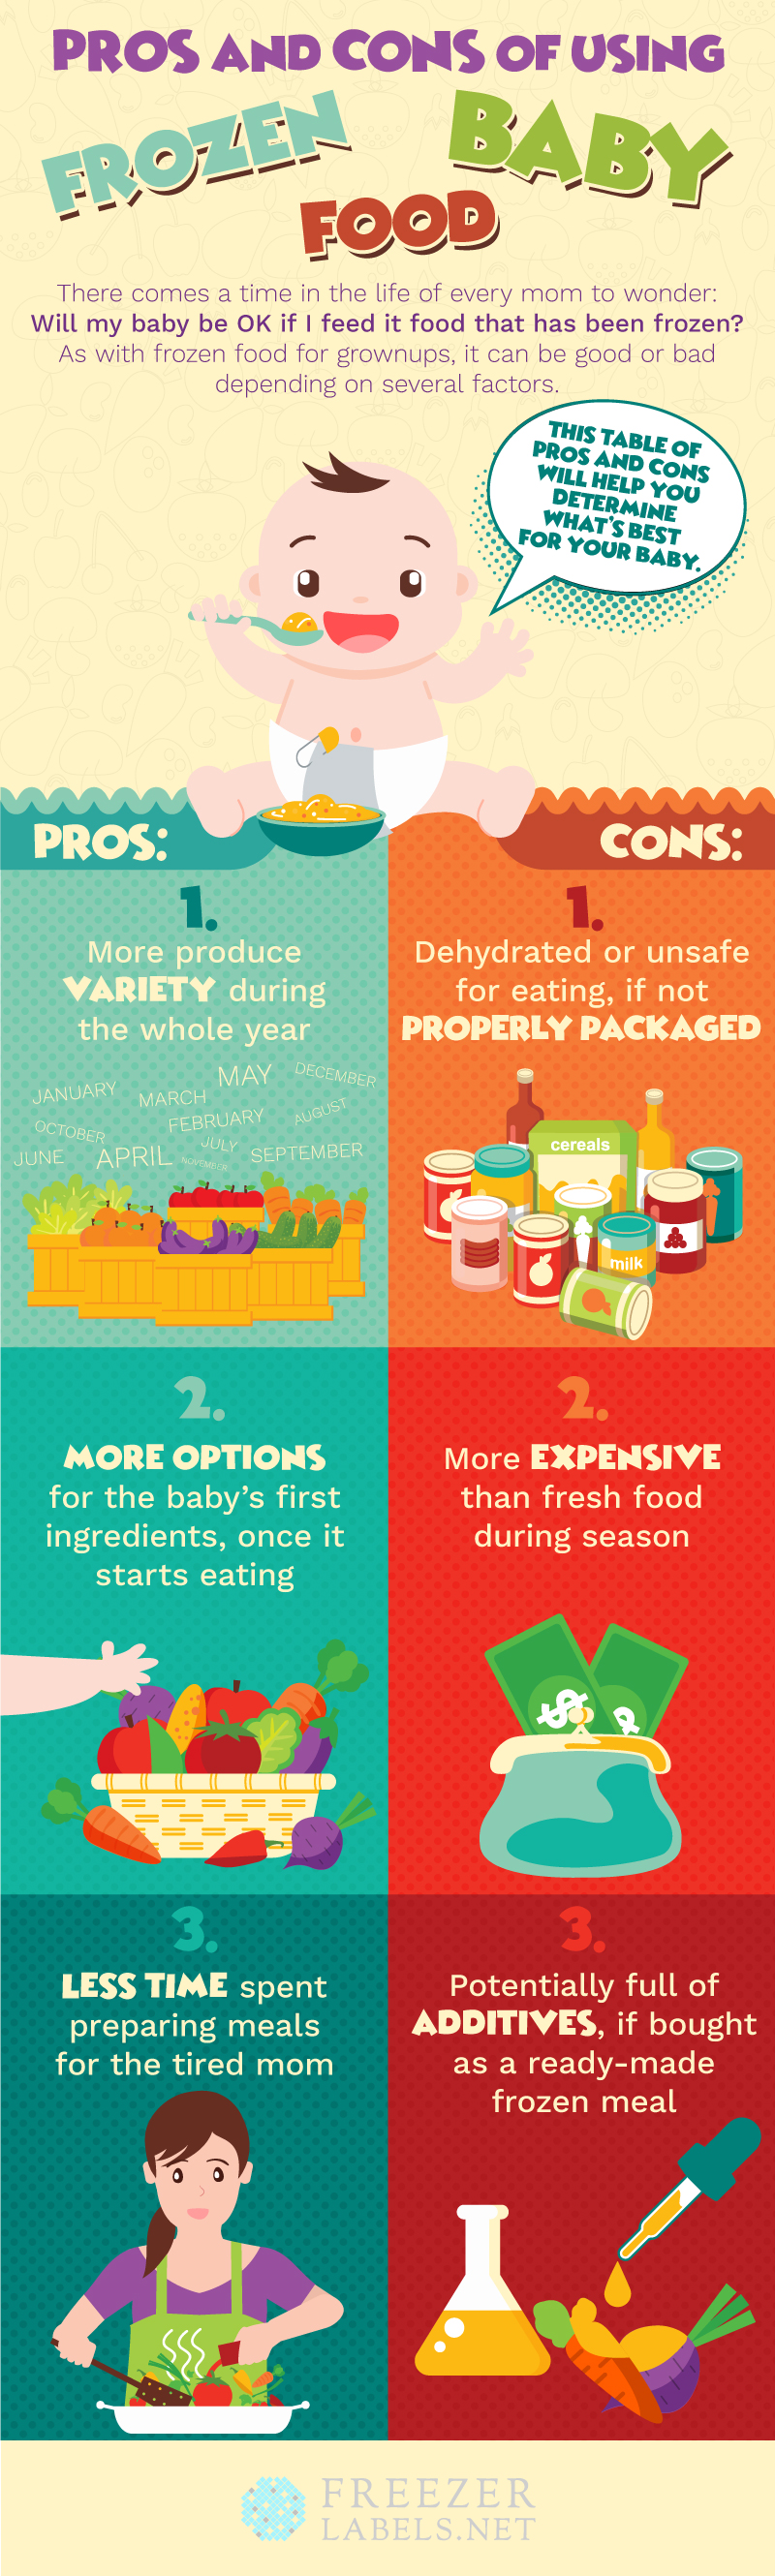 pros and cons of using frozen baby food infographic